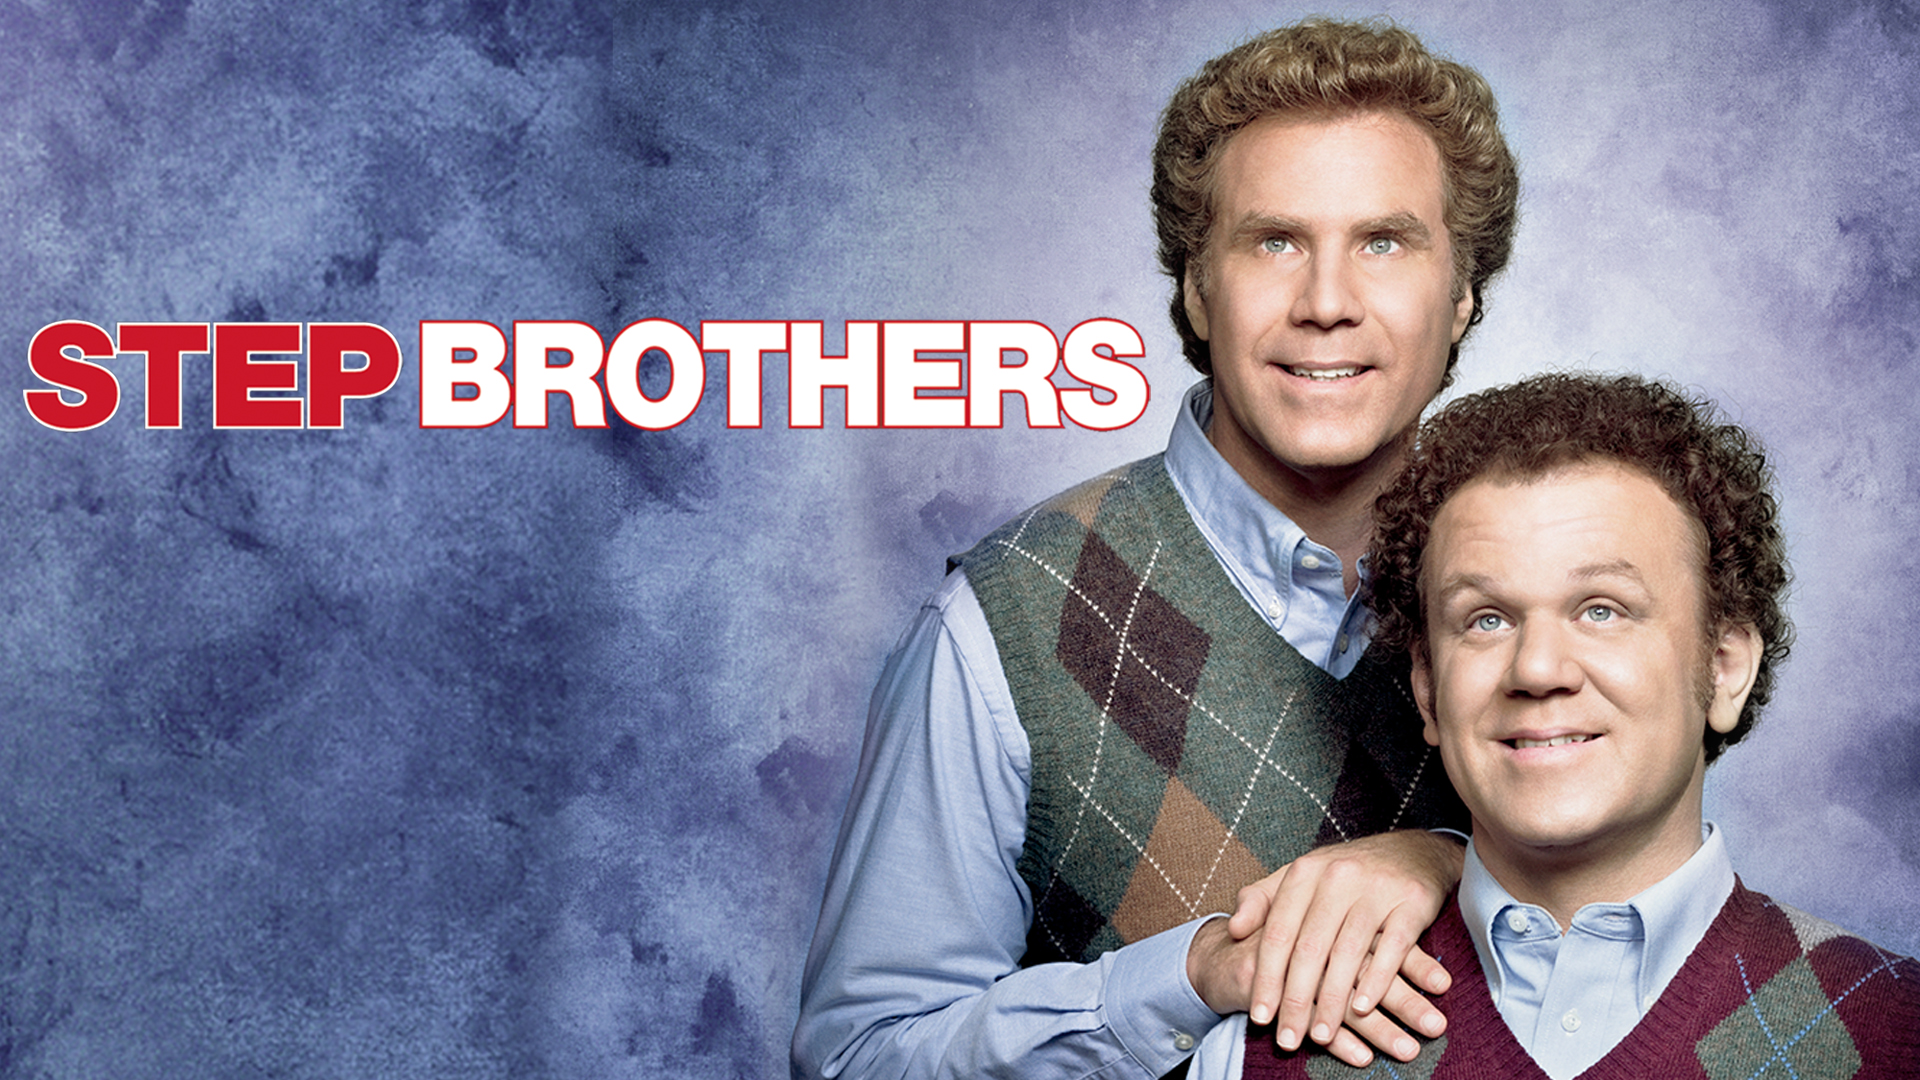 Watch Step Brothers Online with NEON.